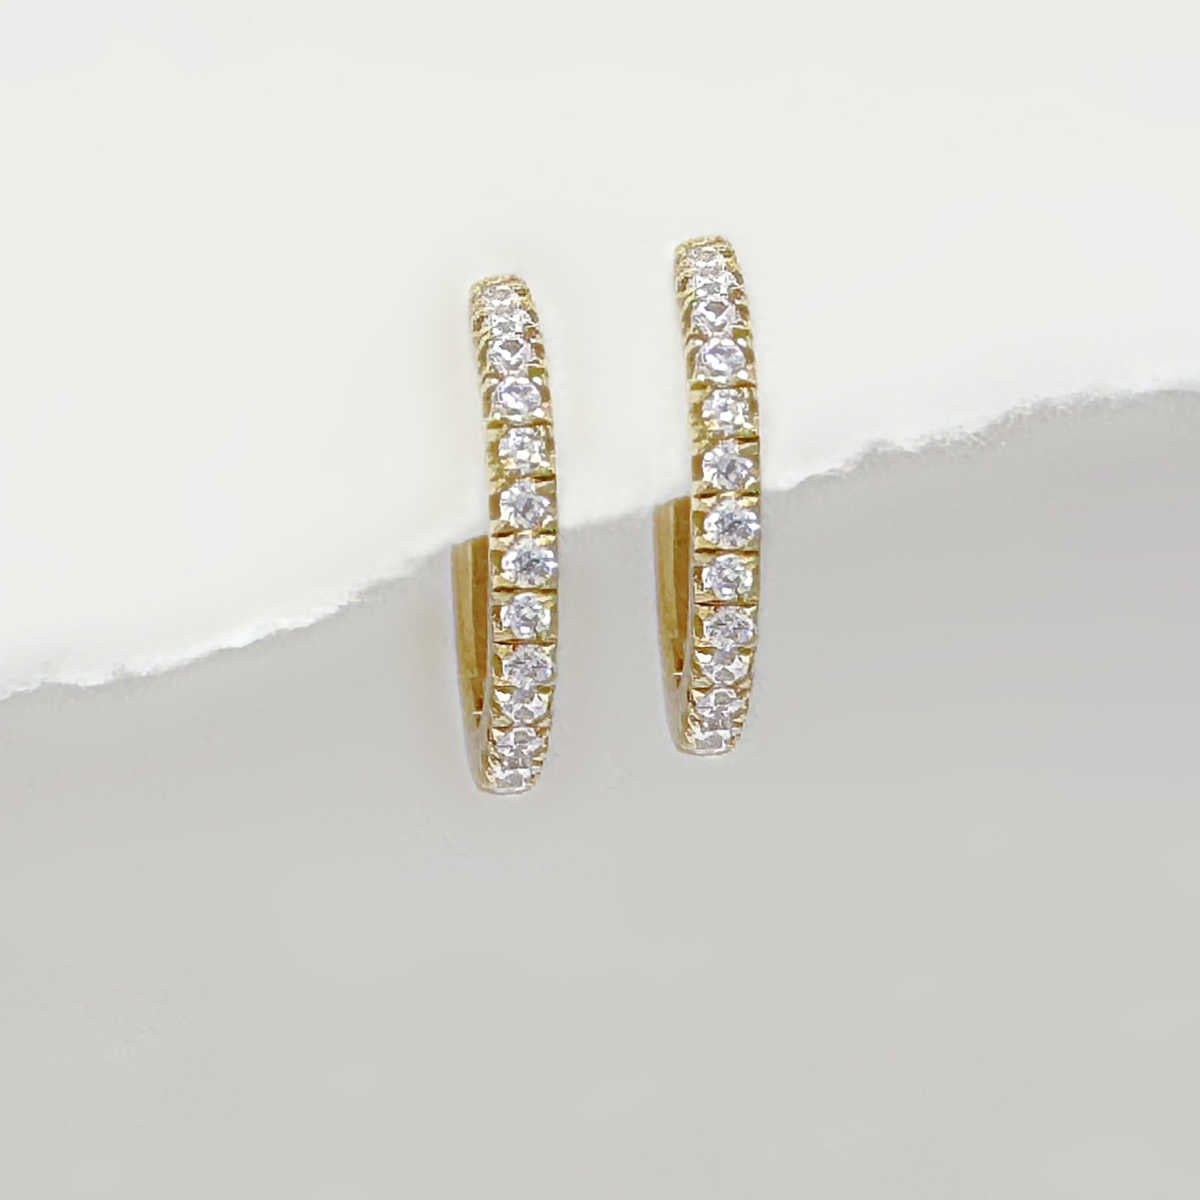 Gold Plated Huggies | Small Cubic Zirconia Hoop Earrings for Helix or Lobe Piercing from Two of Most